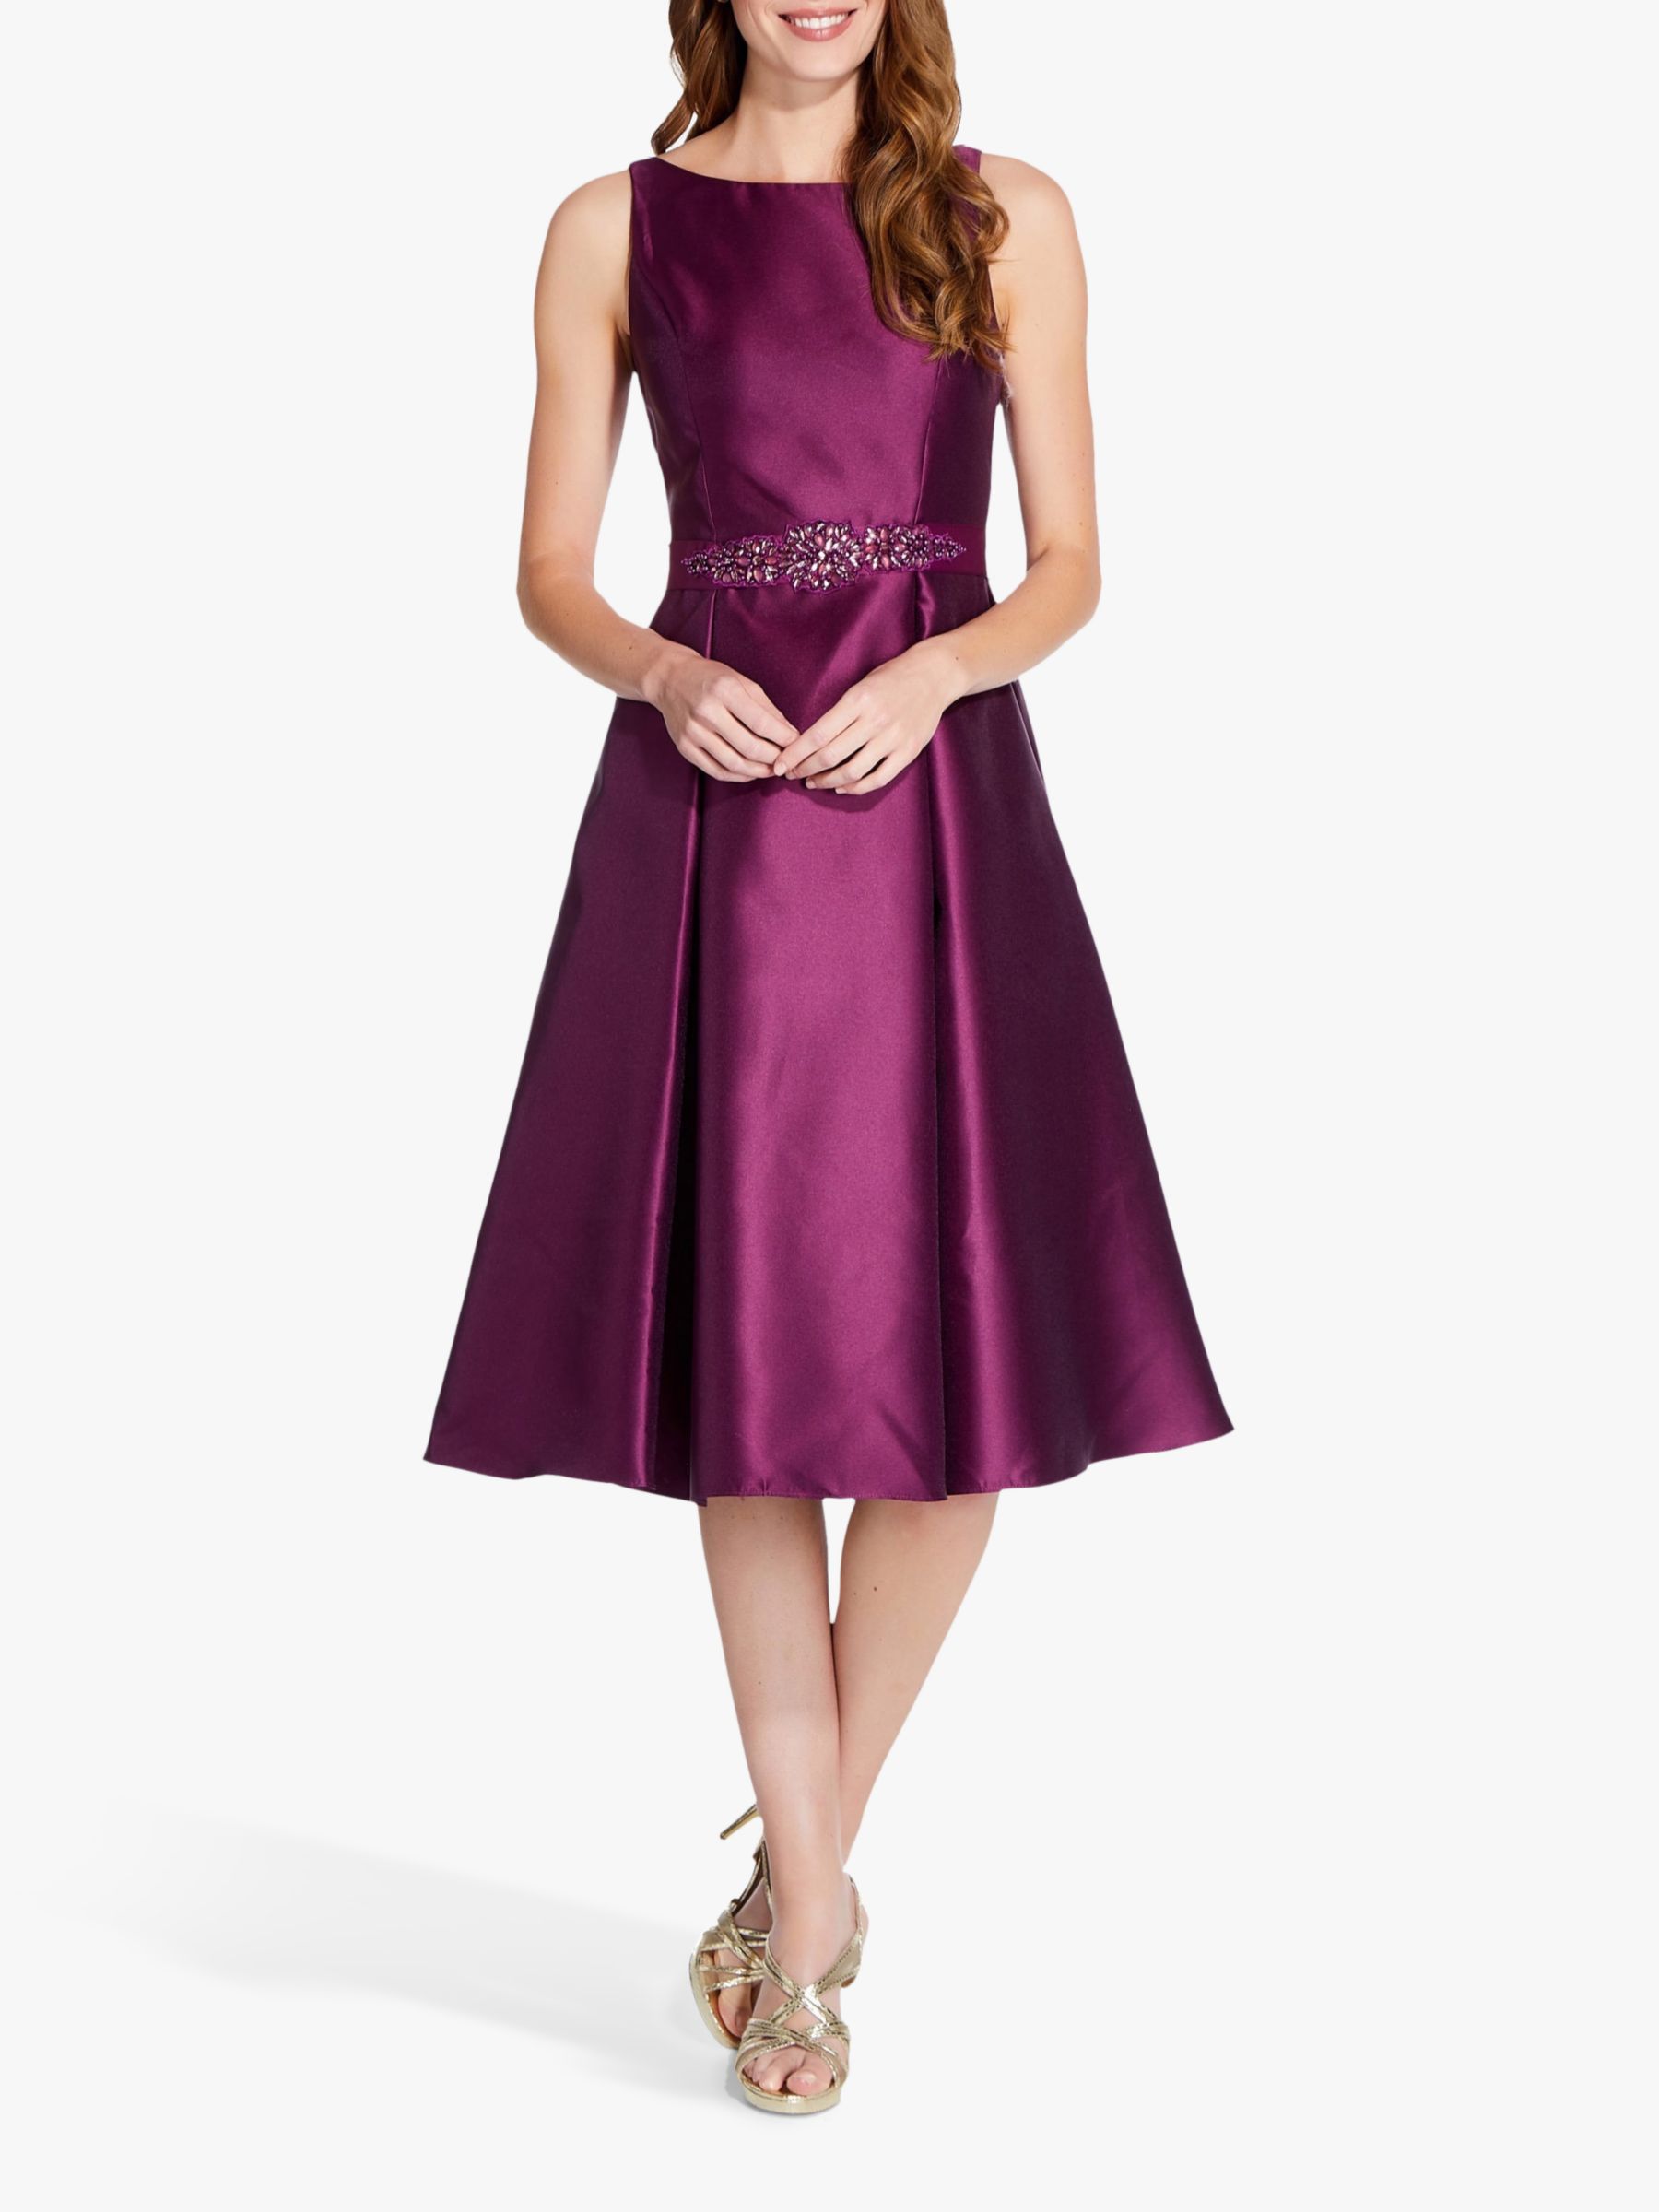 Adrianna Papell Mikado Party Dress, Amethyst at John Lewis & Partners